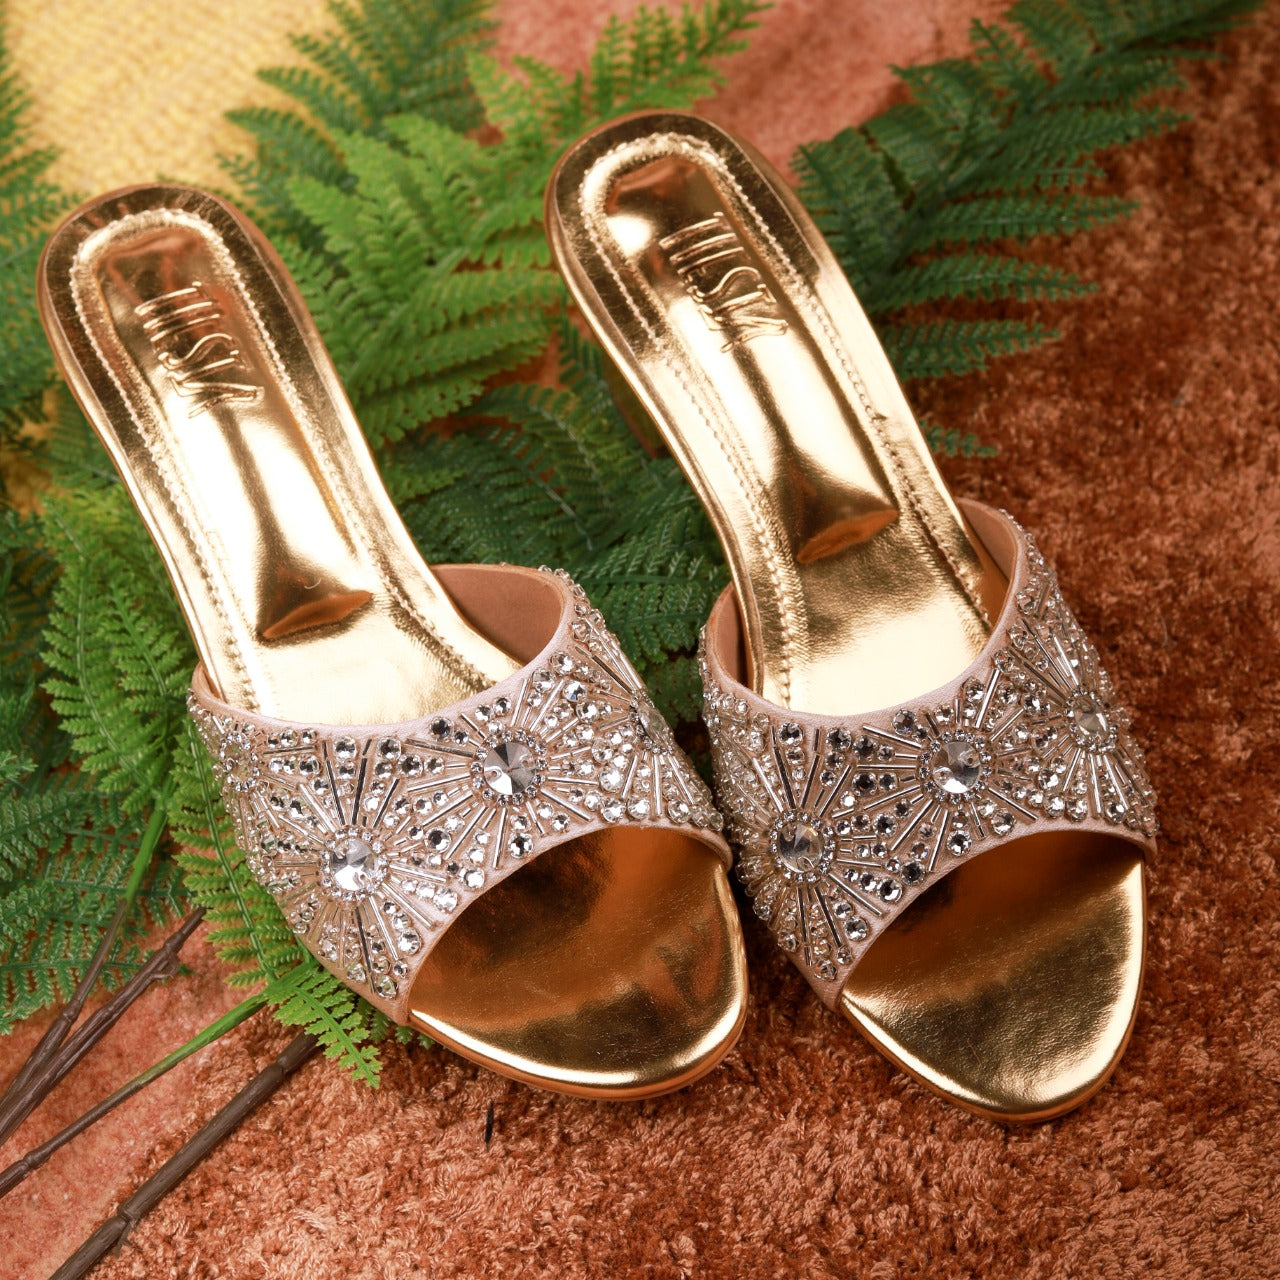 Reflective Gold and Silver Heels - Only Worn Once!